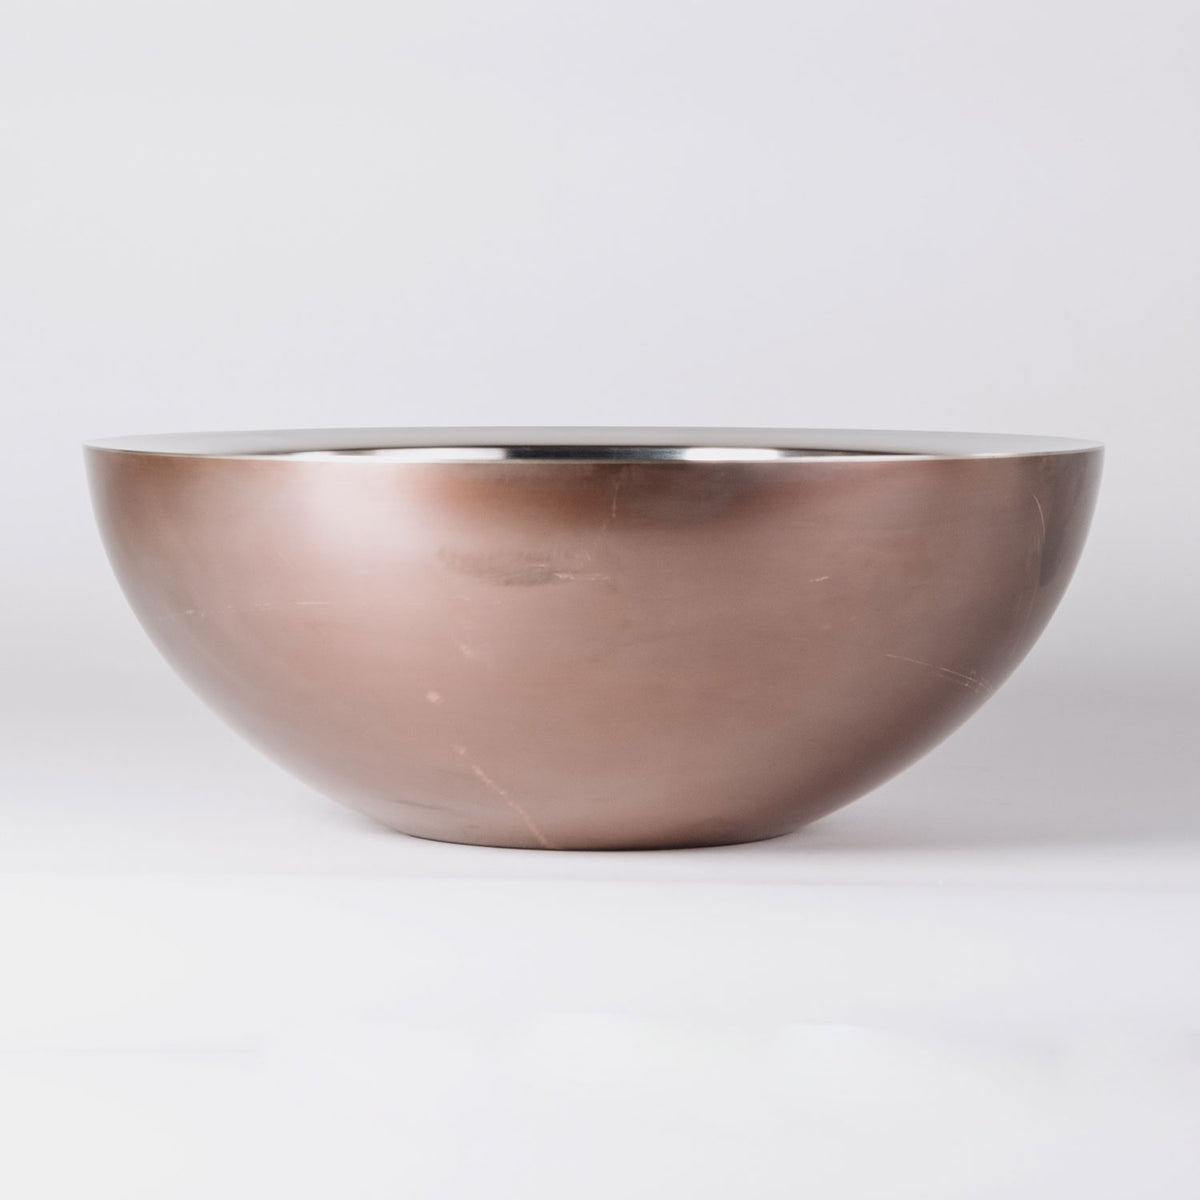 Round Copper/ Stainless Vessel Sink image 3 of 4